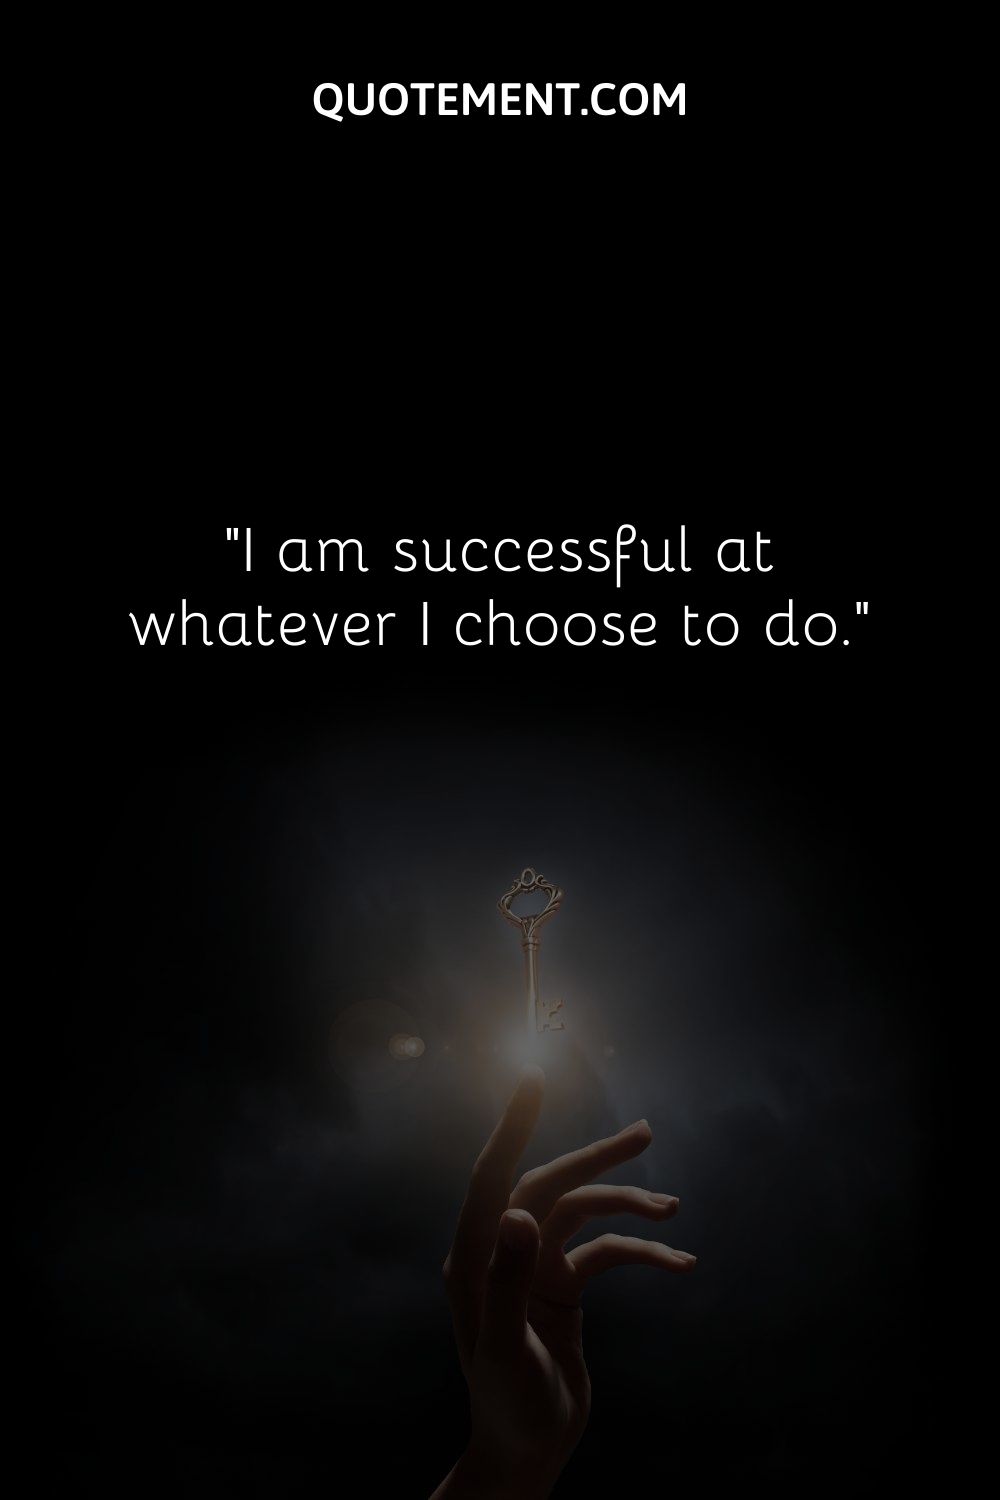 I am successful at whatever I choose to do